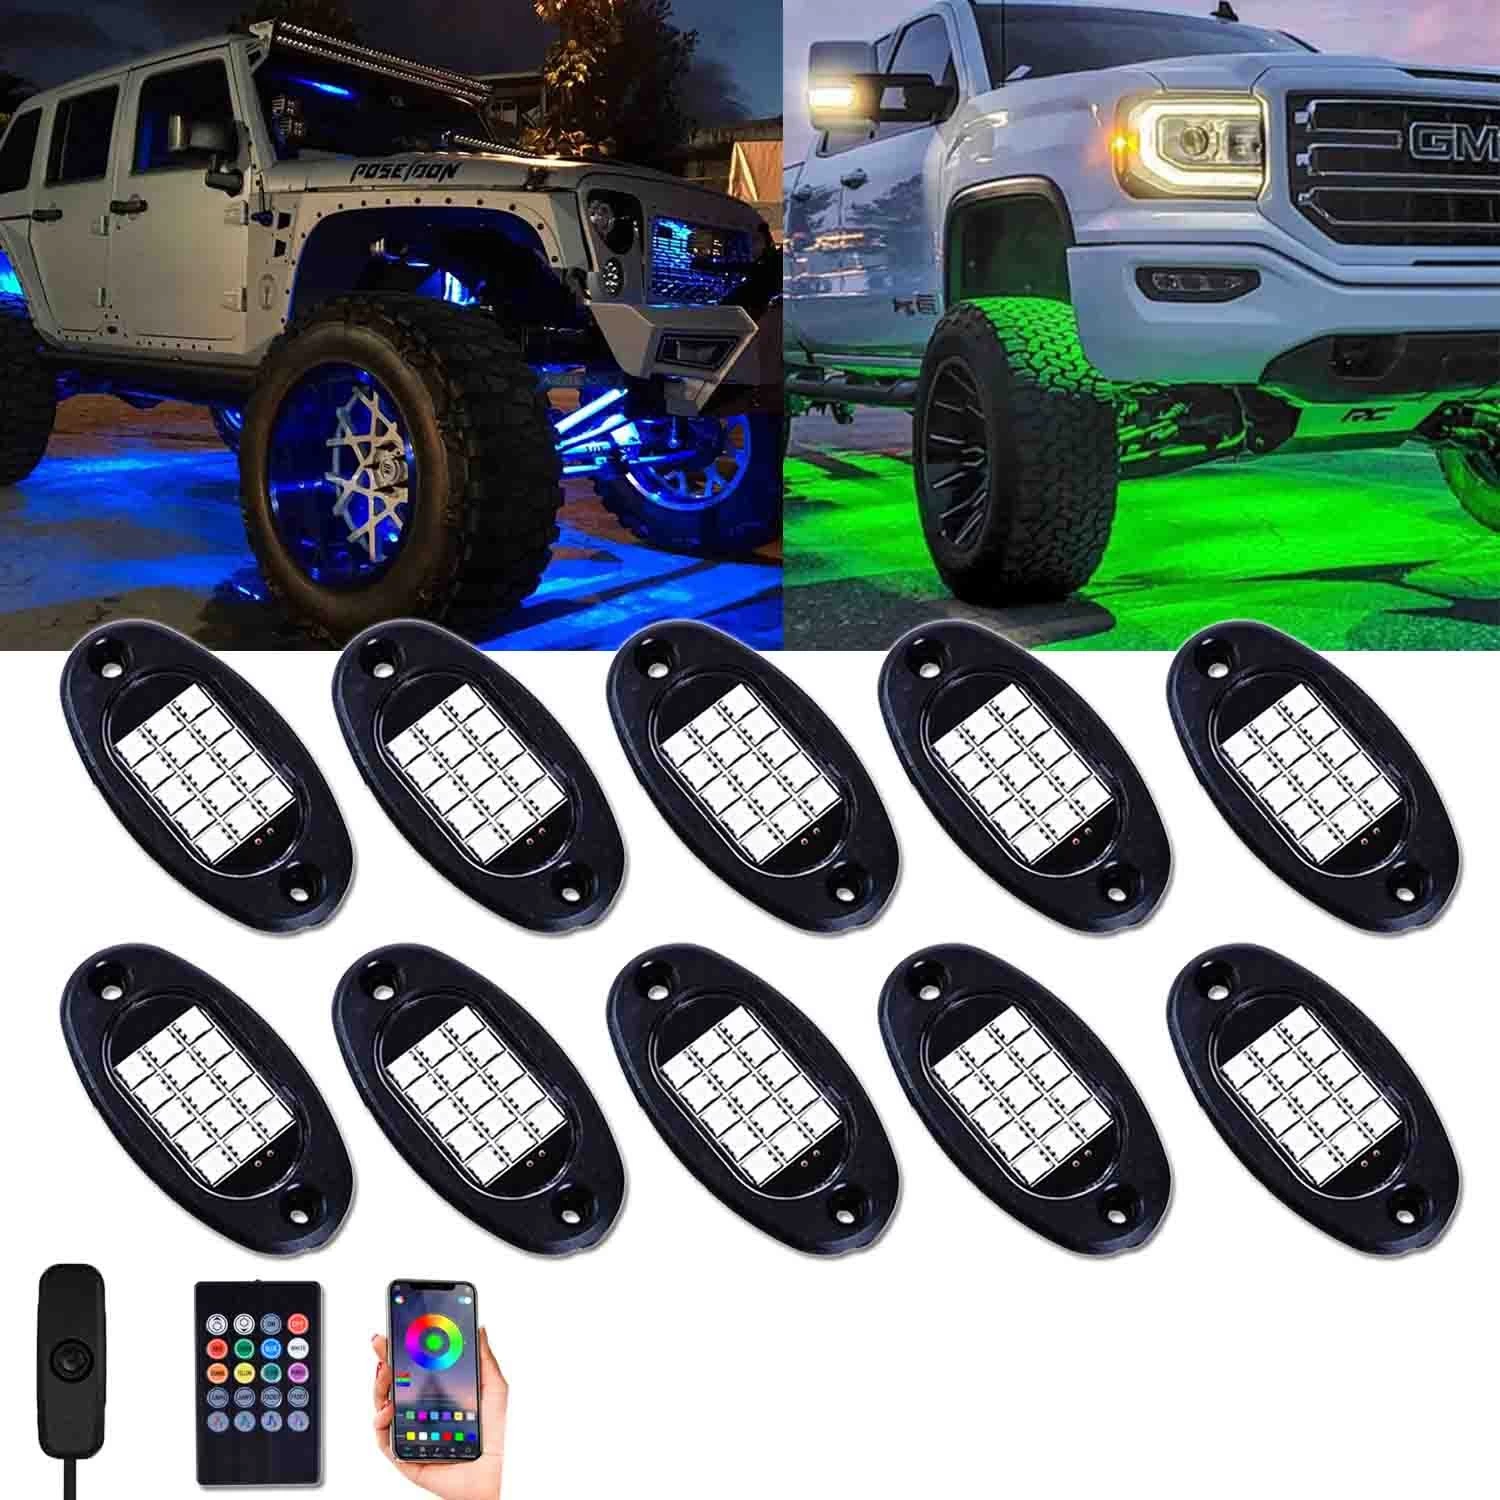 China Unionlux RGB LED Rock Lights 60 LEDs Multicolor Underglow Neon Lights Waterproof Aluminum Light Kit with RF/APP Control Music Mode Timing Function for Truck Jeep Off Road Car UTV ATV SUV 8 Packs fabrikant